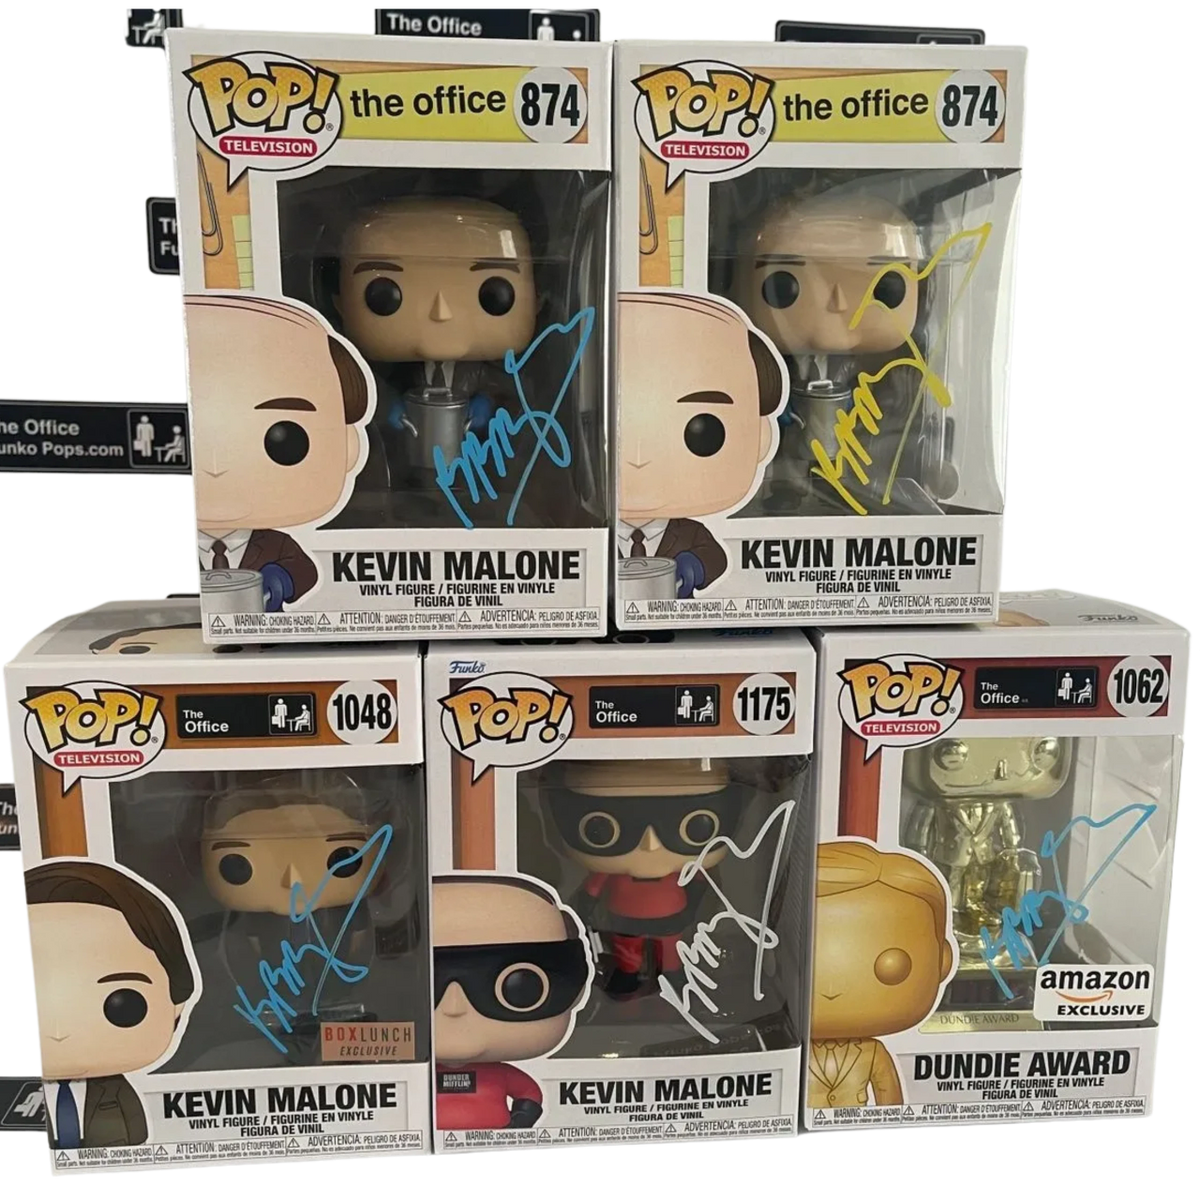 IN STOCK, AUTOGRAPHED BRIAN BAUMGARTNER (KEVIN MALONE) FUNKO POPS (5  VARIANTS TO CHOOSE FROM)